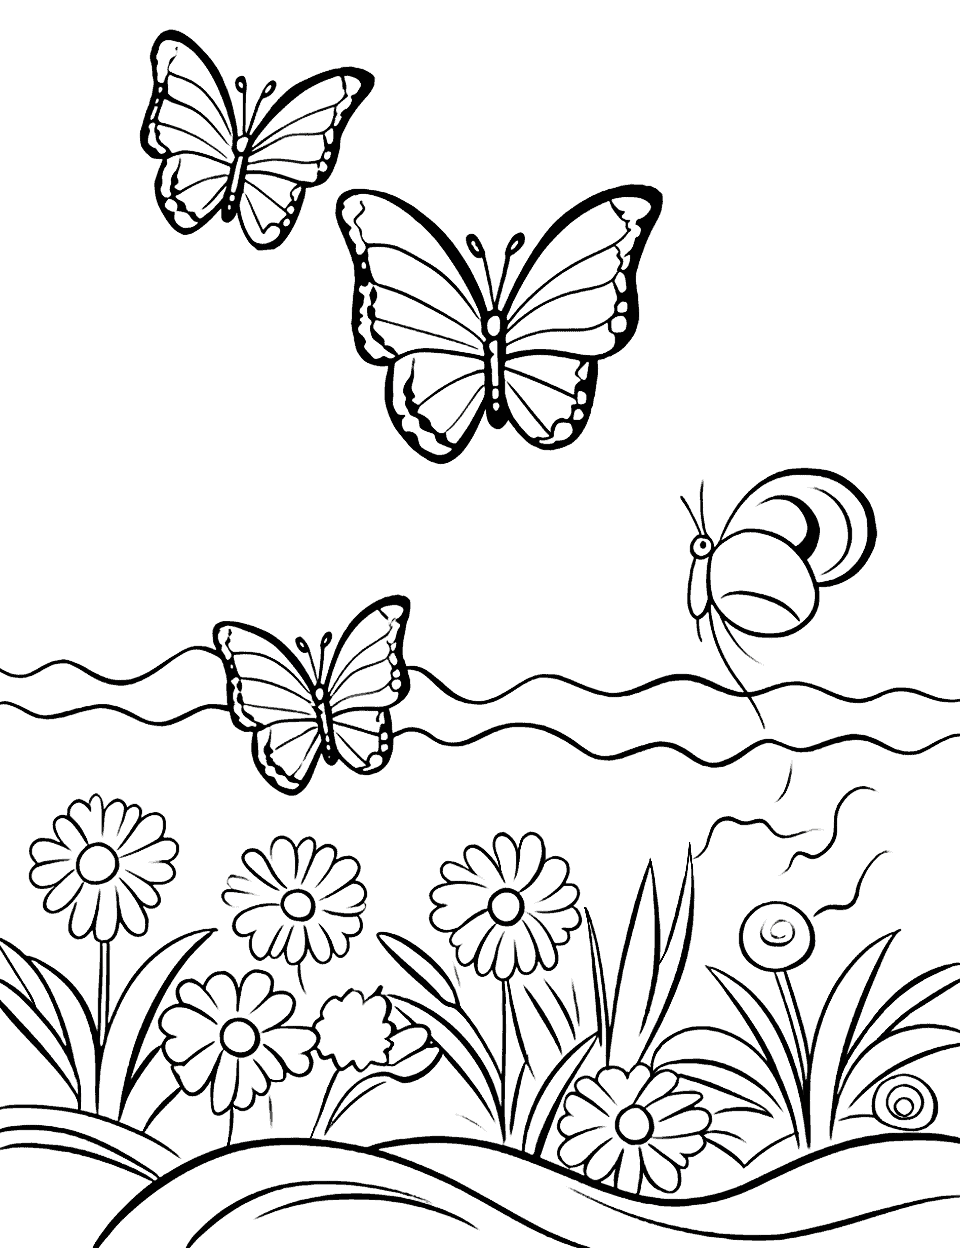 Butterfly Migration Summer Coloring Page - A group of brightly colored butterflies migrating across a sunny field of flowers.